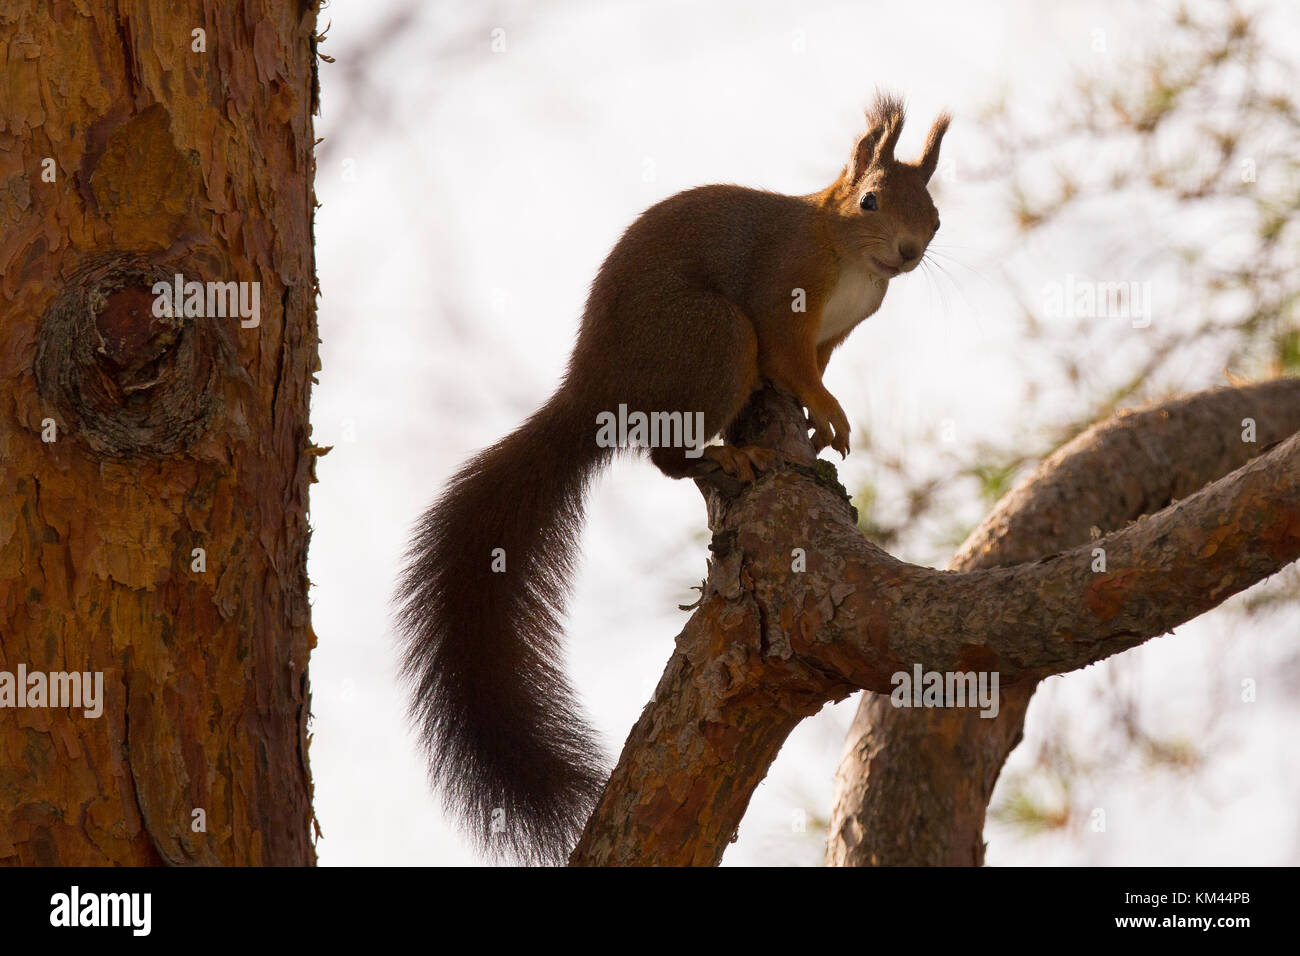 Squirrel on a tree Stock Photo